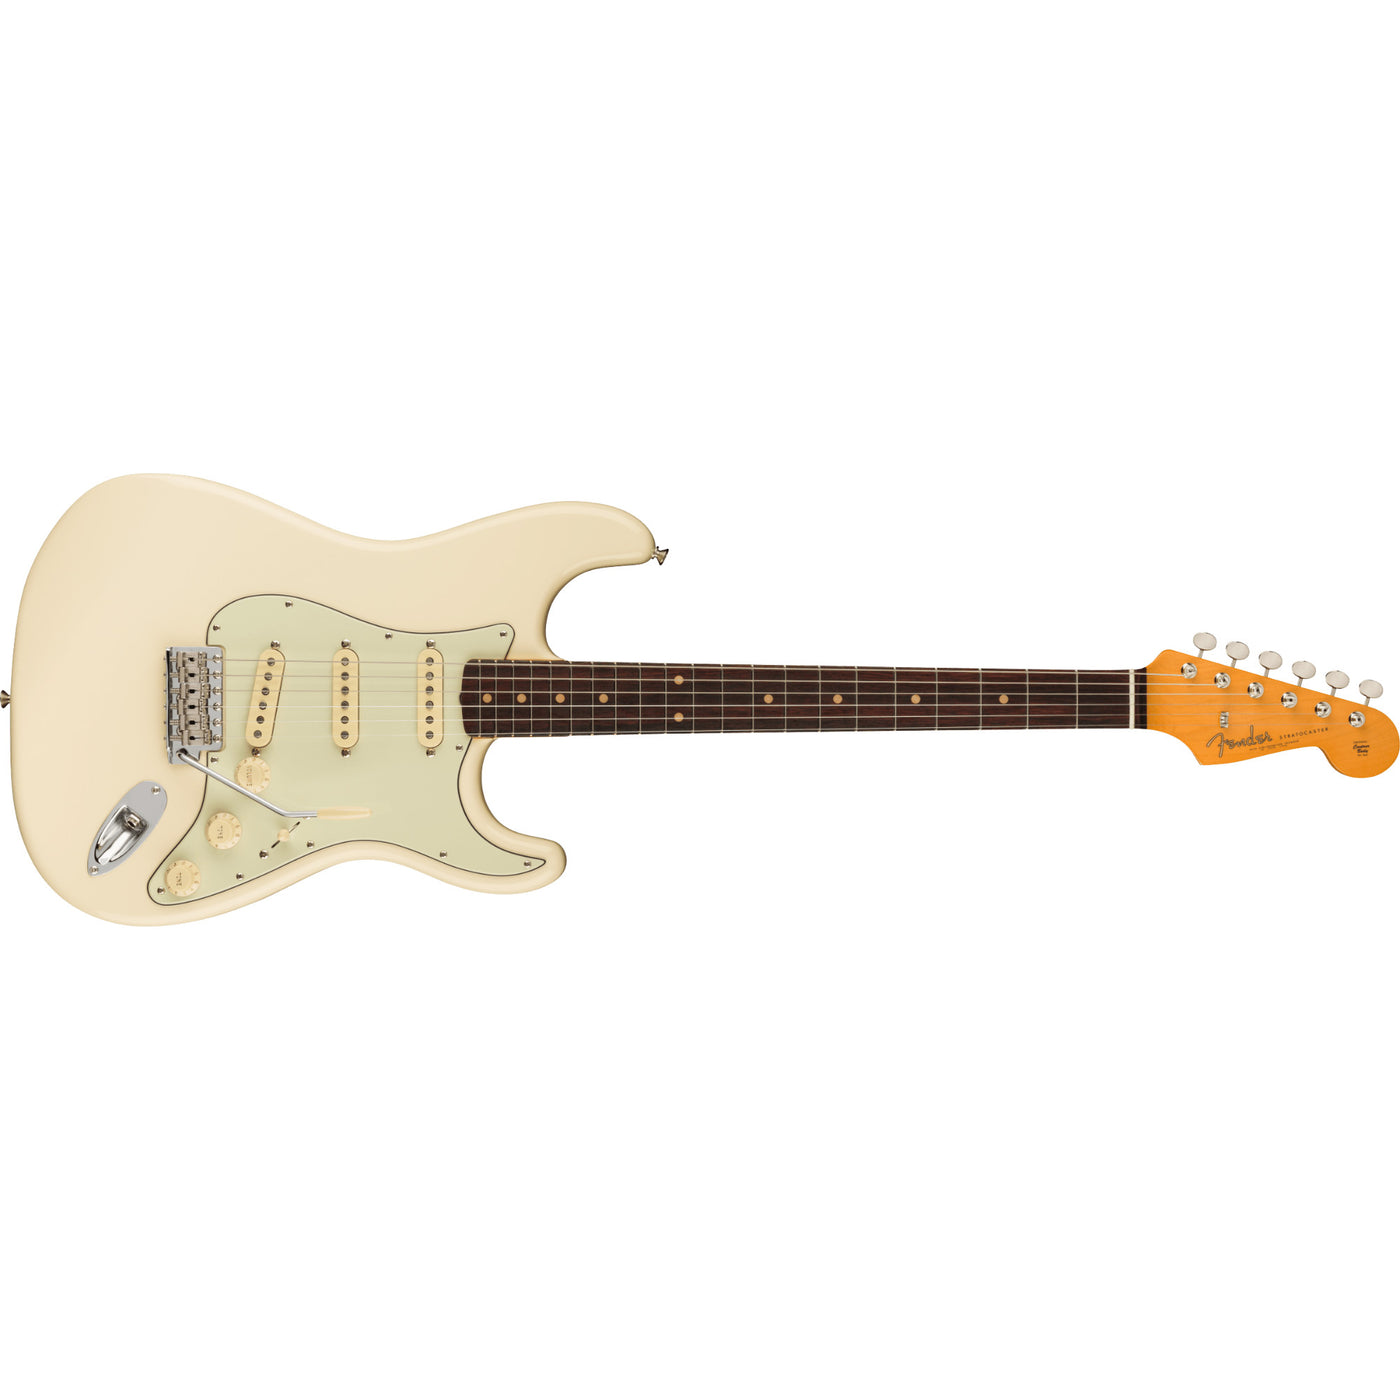 Fender American Vintage II 1961 Stratocaster Electric Guitar, Olympic White (0110250805)